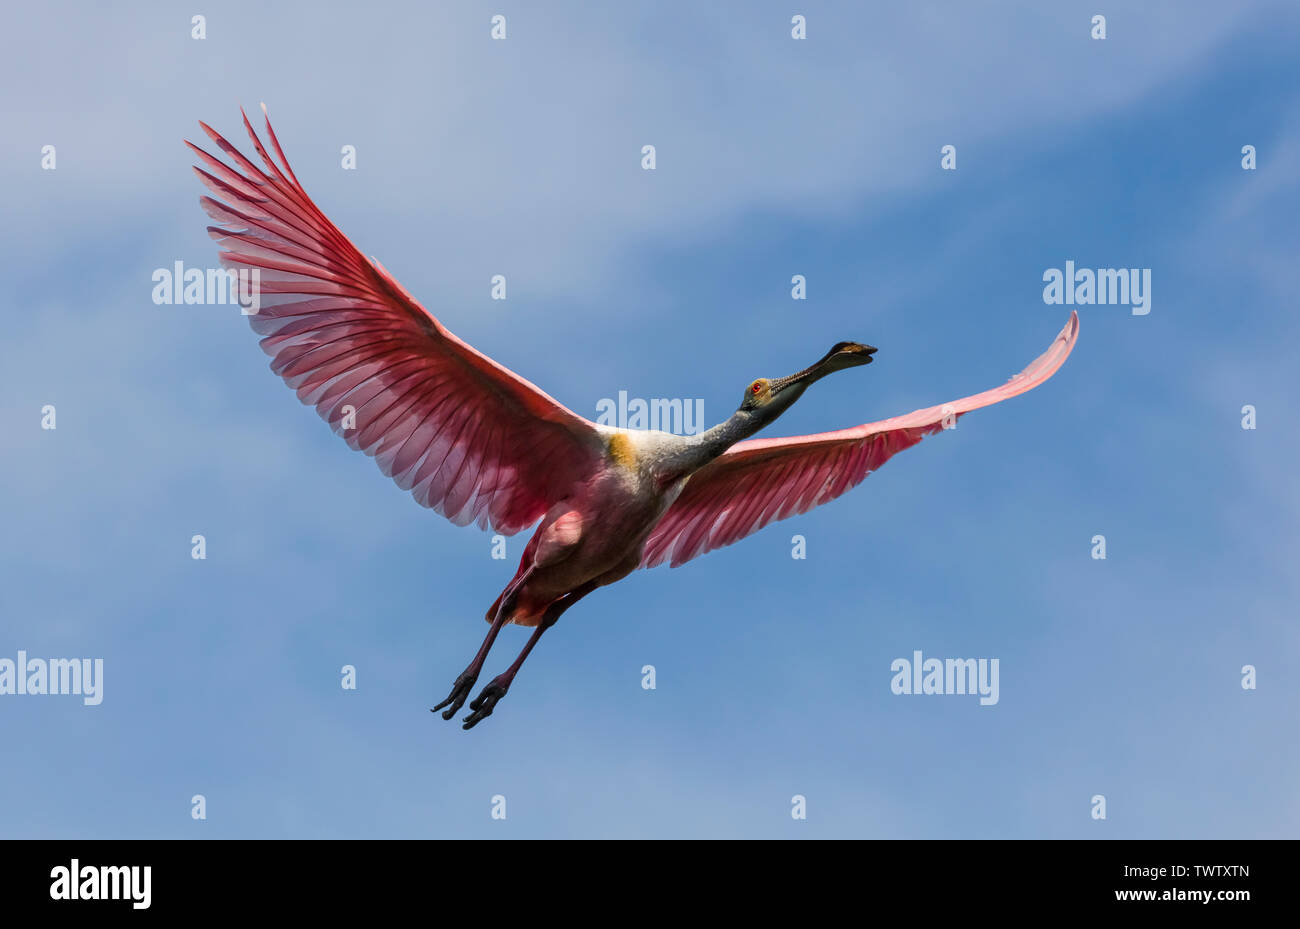 Pink Roseate Spoonbill flying overhead in a blue sky Stock Photo